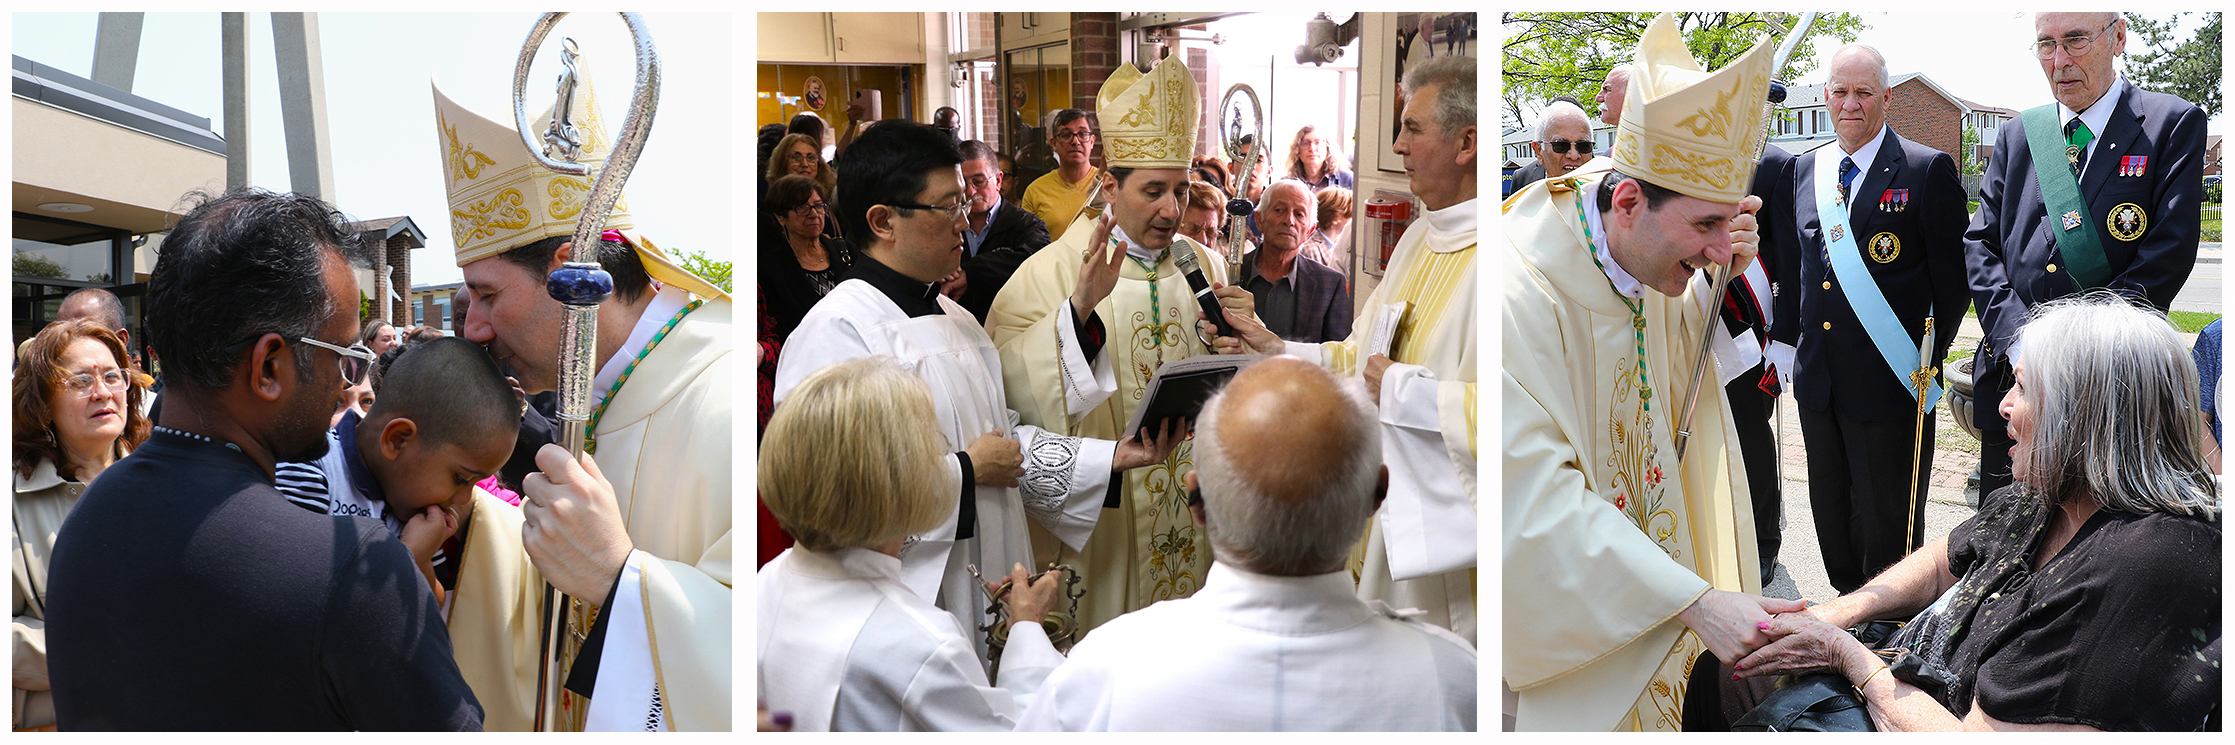 Archbishop Leo visits Our Lady of the Airways